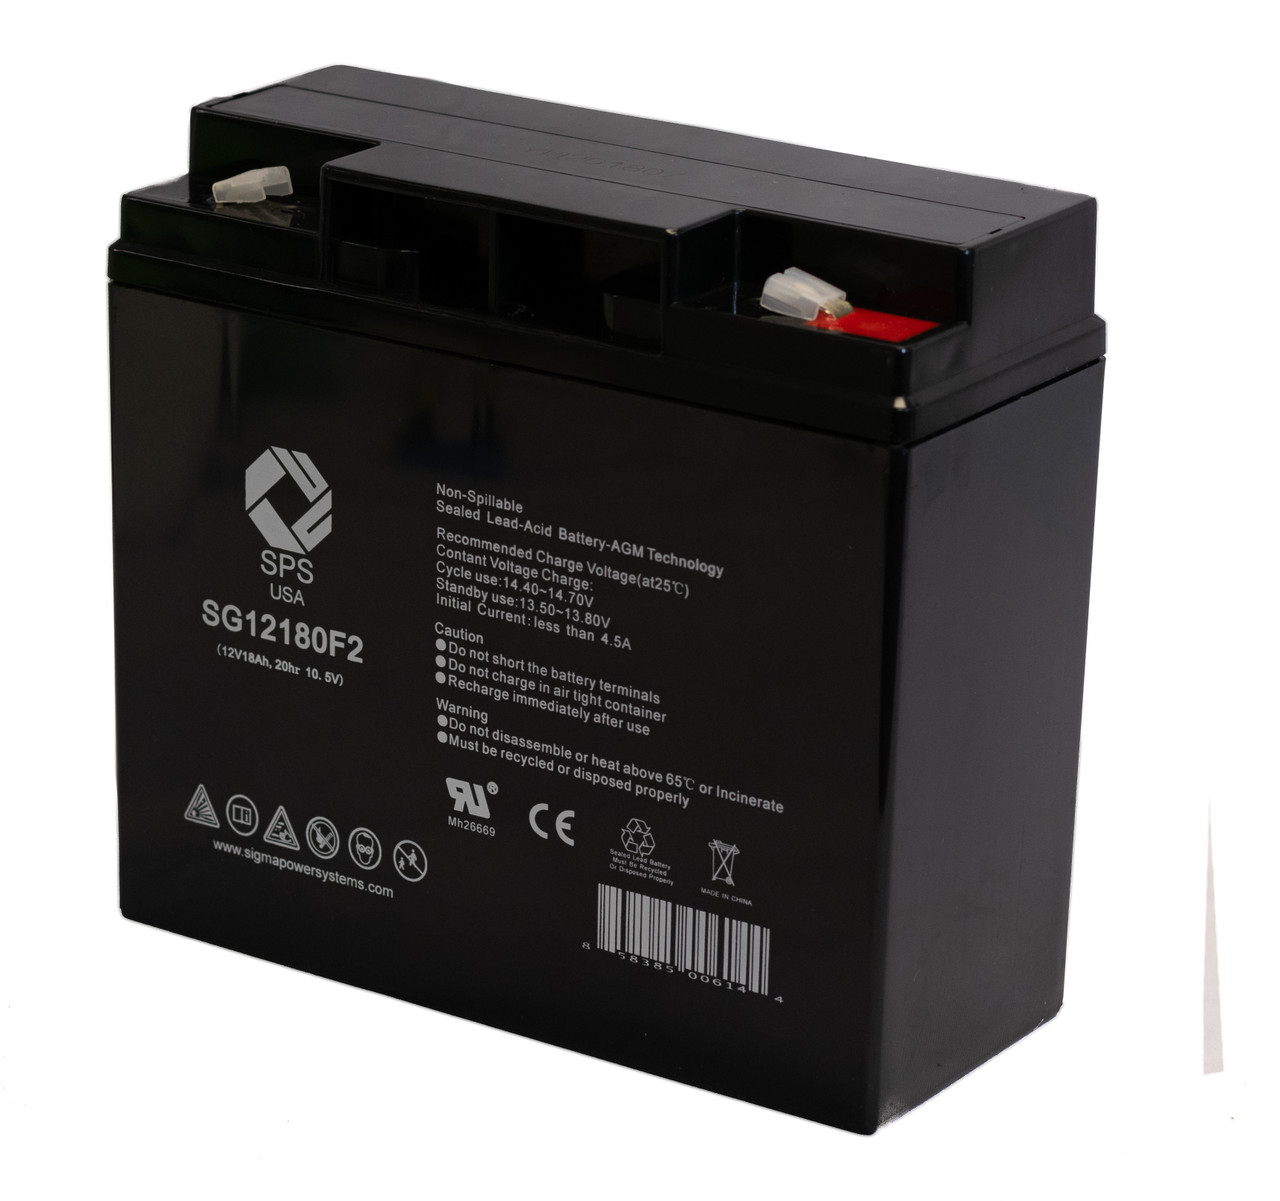 Raion Power Replacement 12V 18Ah Battery for Sentry Battery PM12180-F2